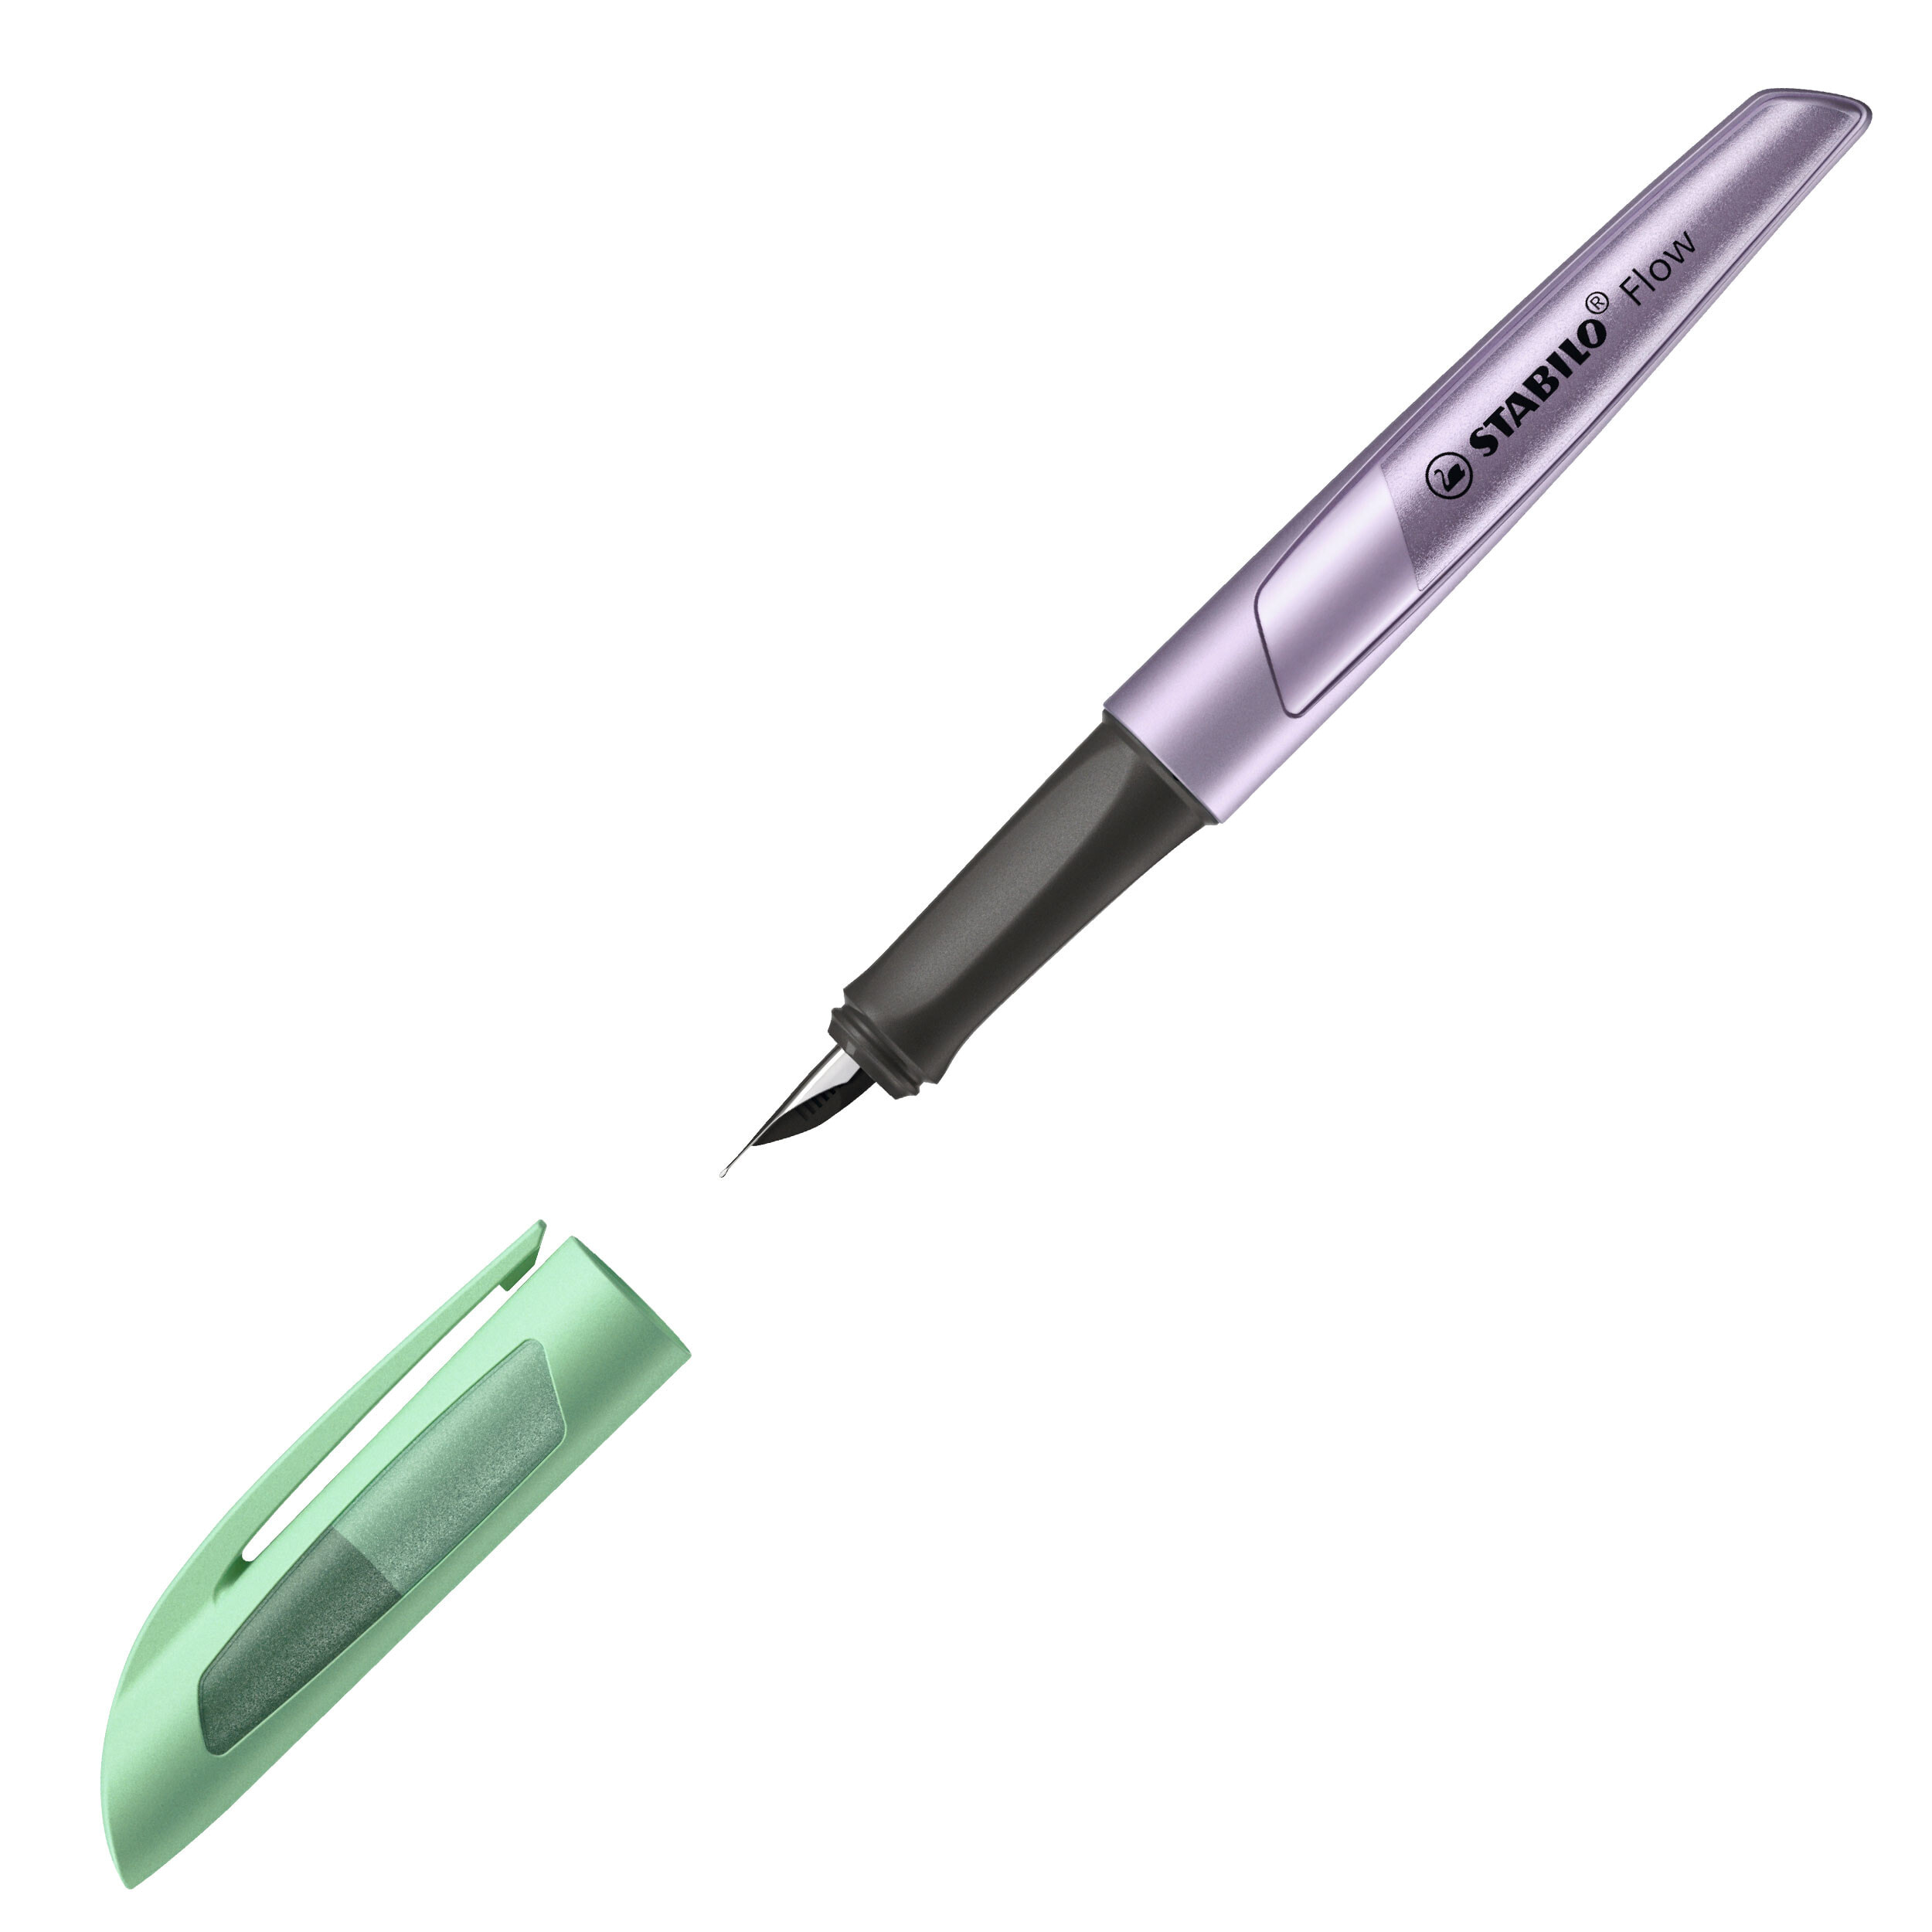 STABILO Flow COSMETIC - Green - Lavender - Cartridge filling system - Stainless steel - Medium - Germany - 18 mm